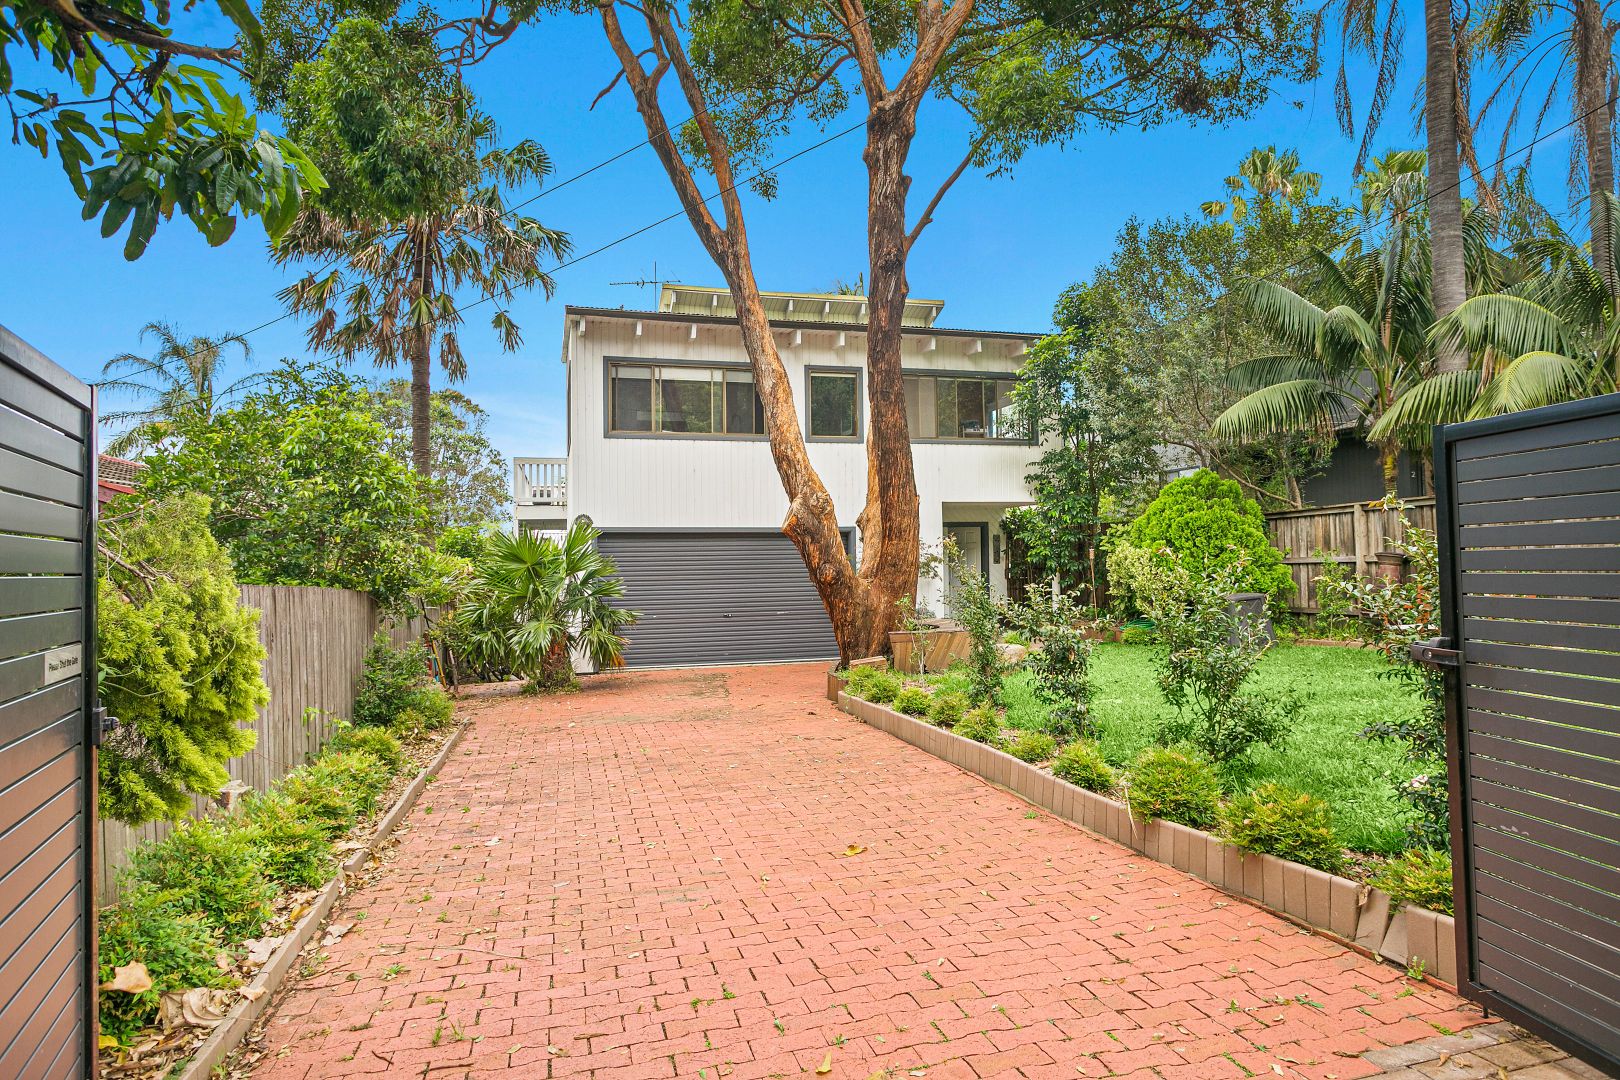 101-103 Lawrence Hargrave Drive, Stanwell Park NSW 2508